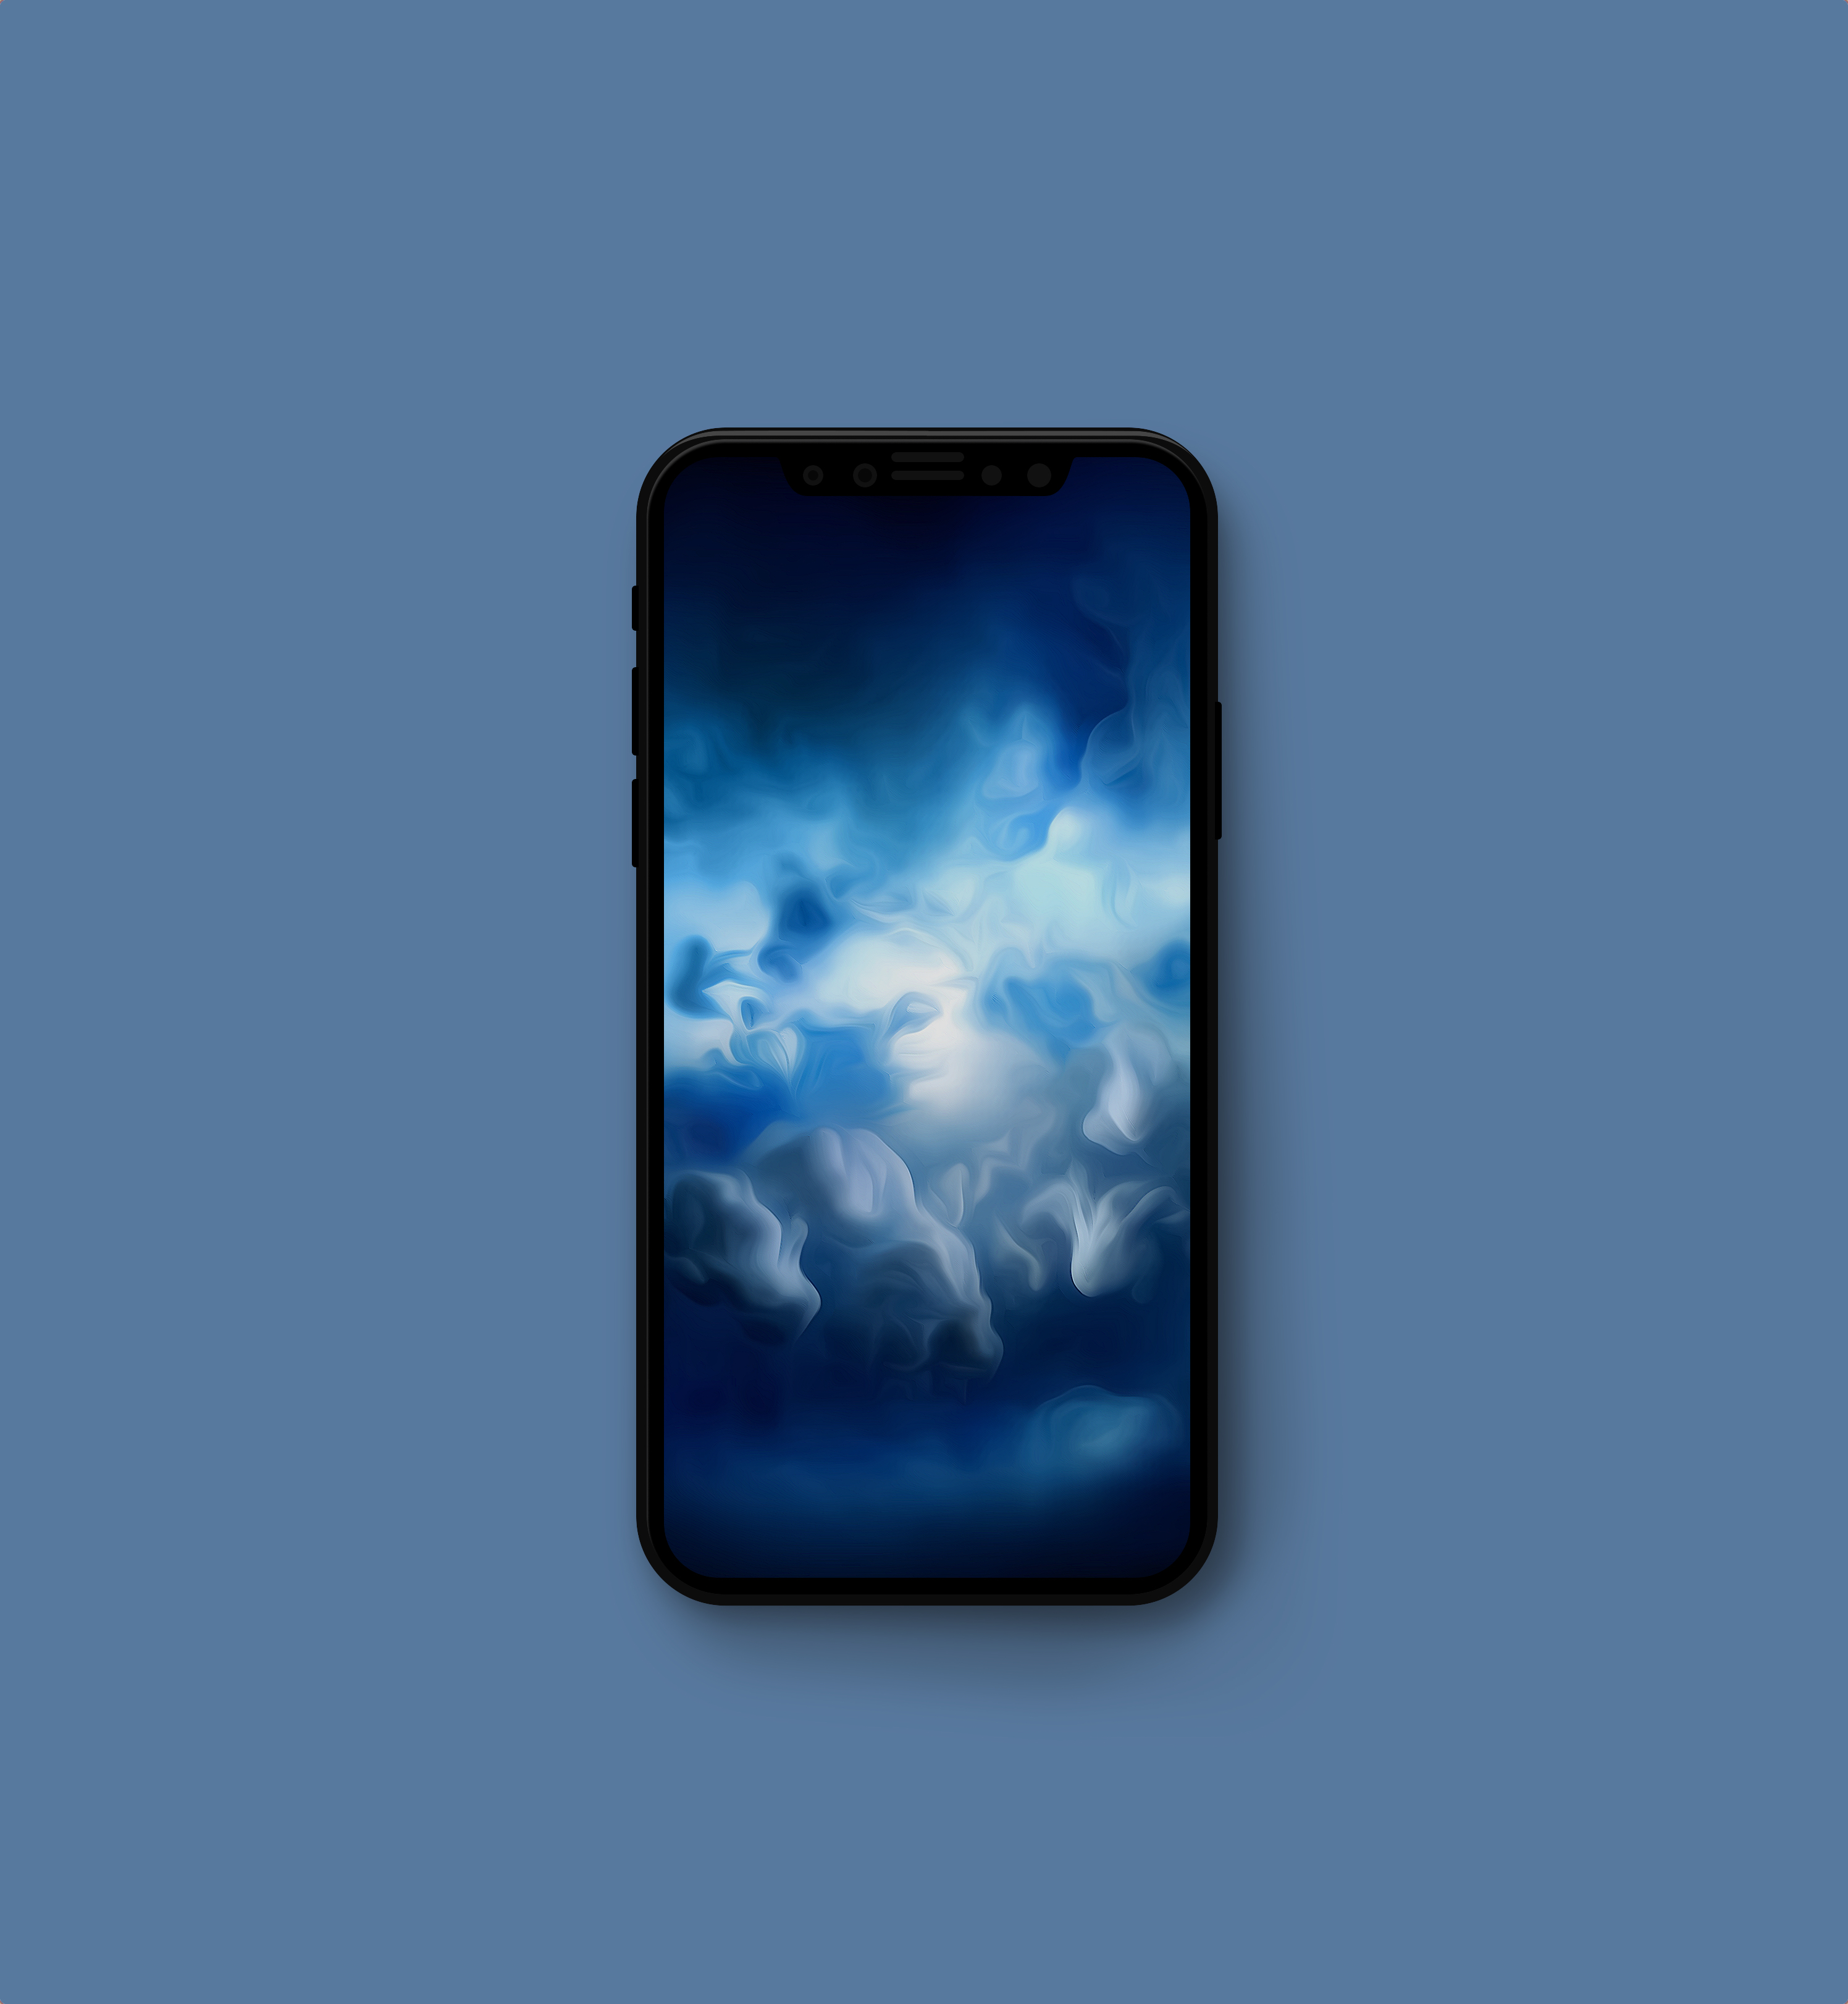 iMac Pro wallpapers optimized for iPhone